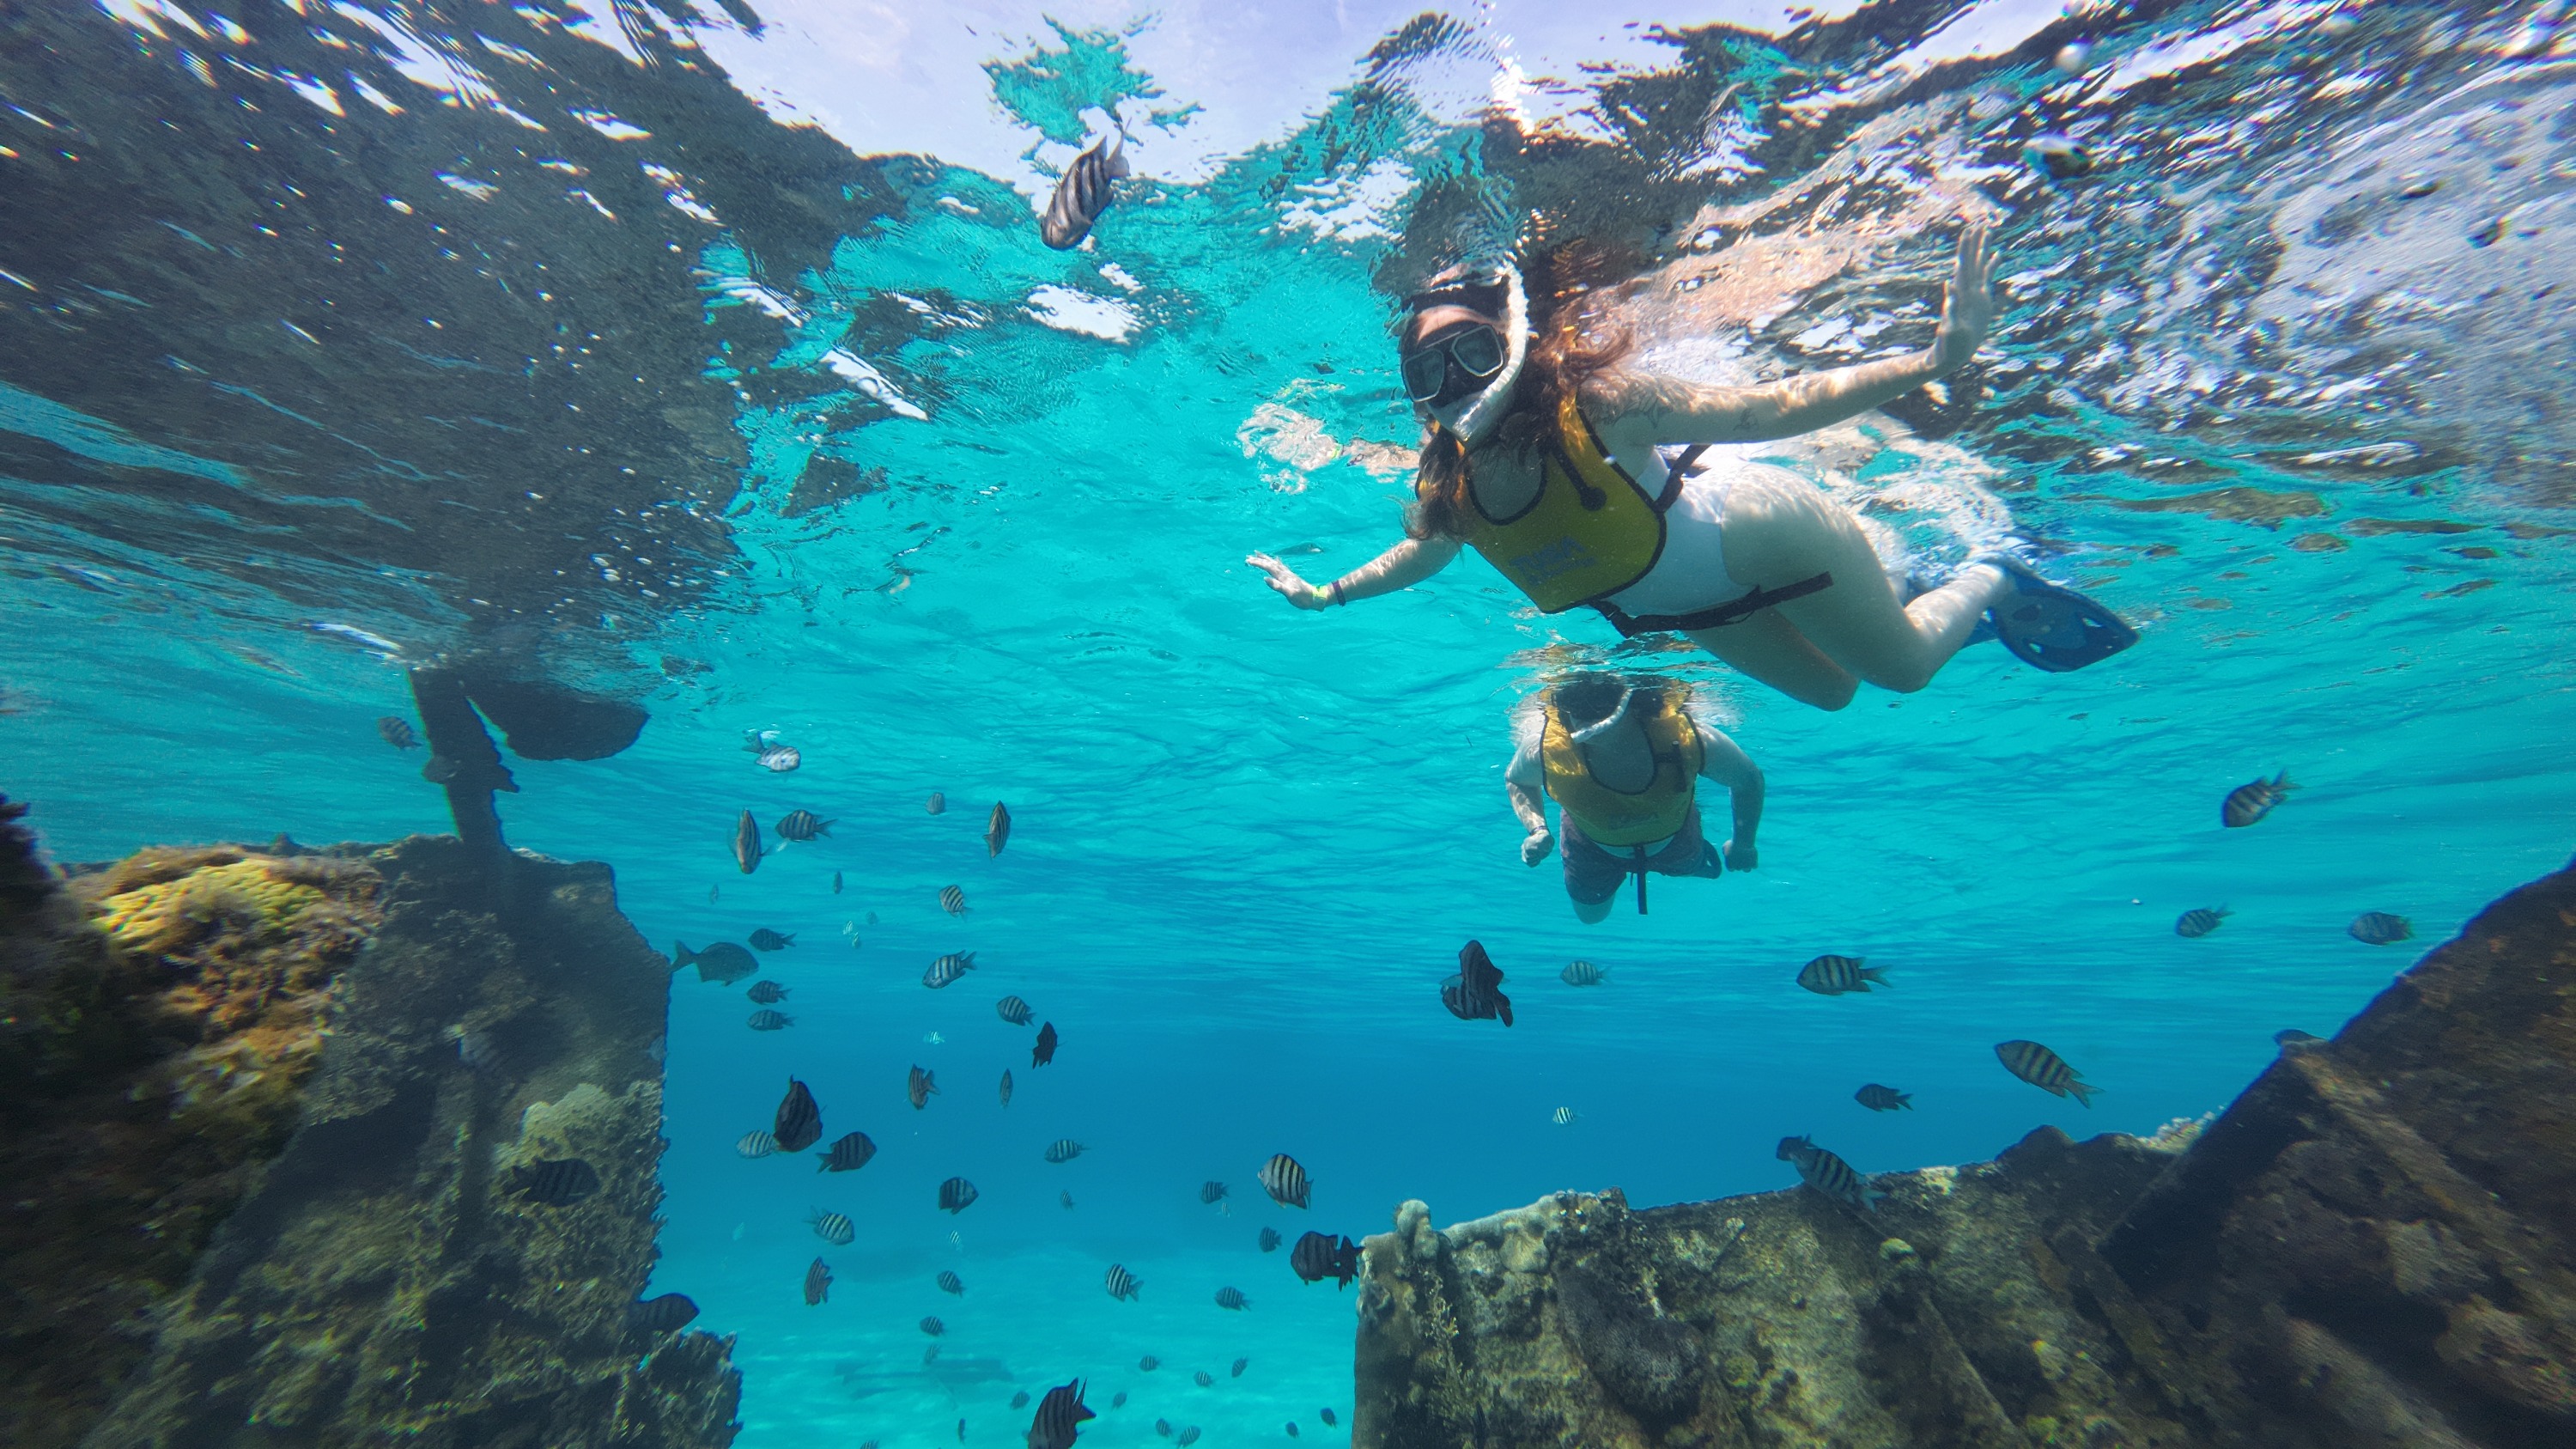 5-in-1 Snorkeling Tour with Turtles, Reefs, Musa, Shipwreck